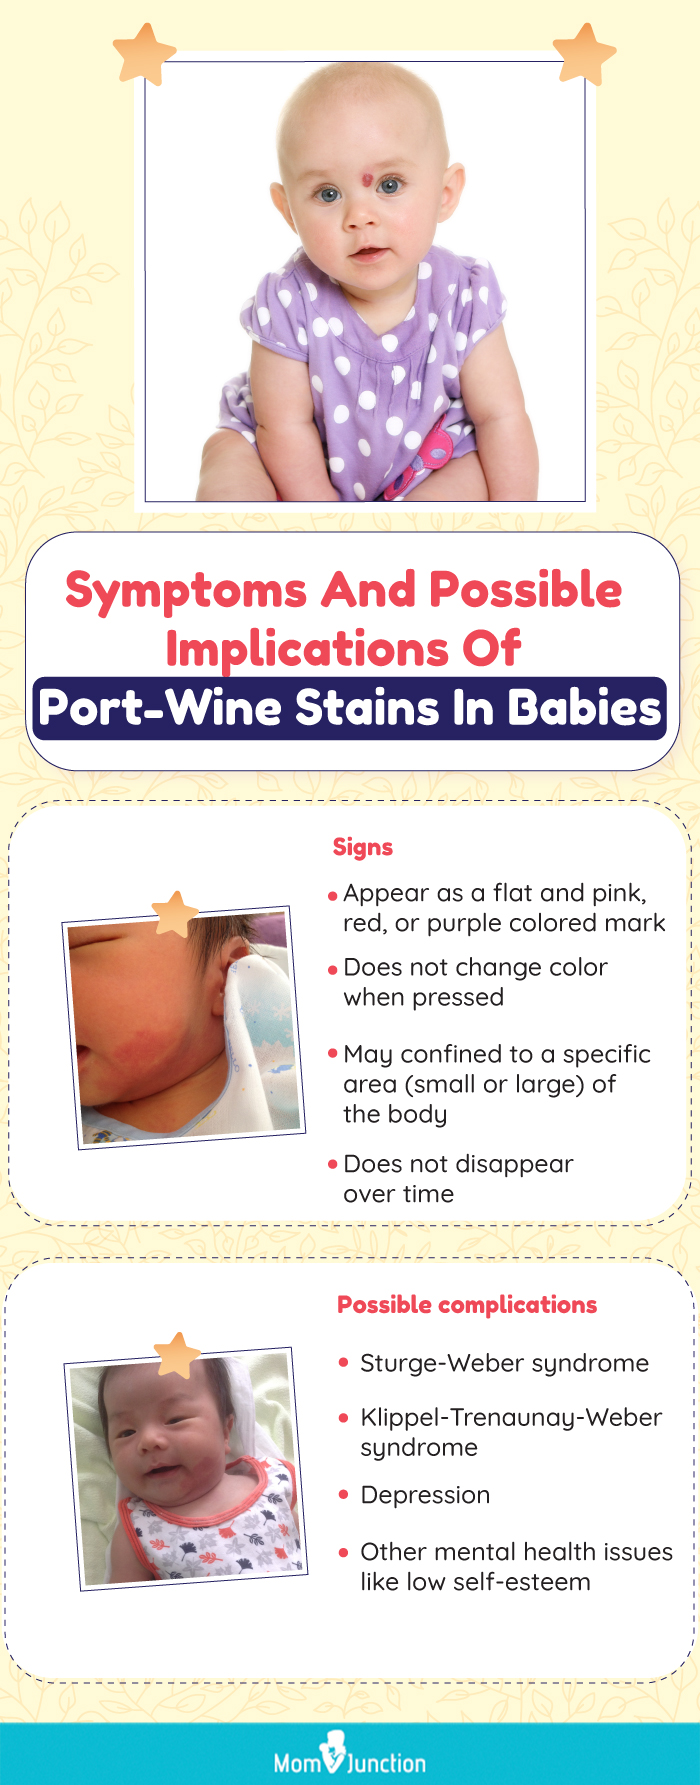 symptoms and possible implications of port wine stains in babies (infographic)